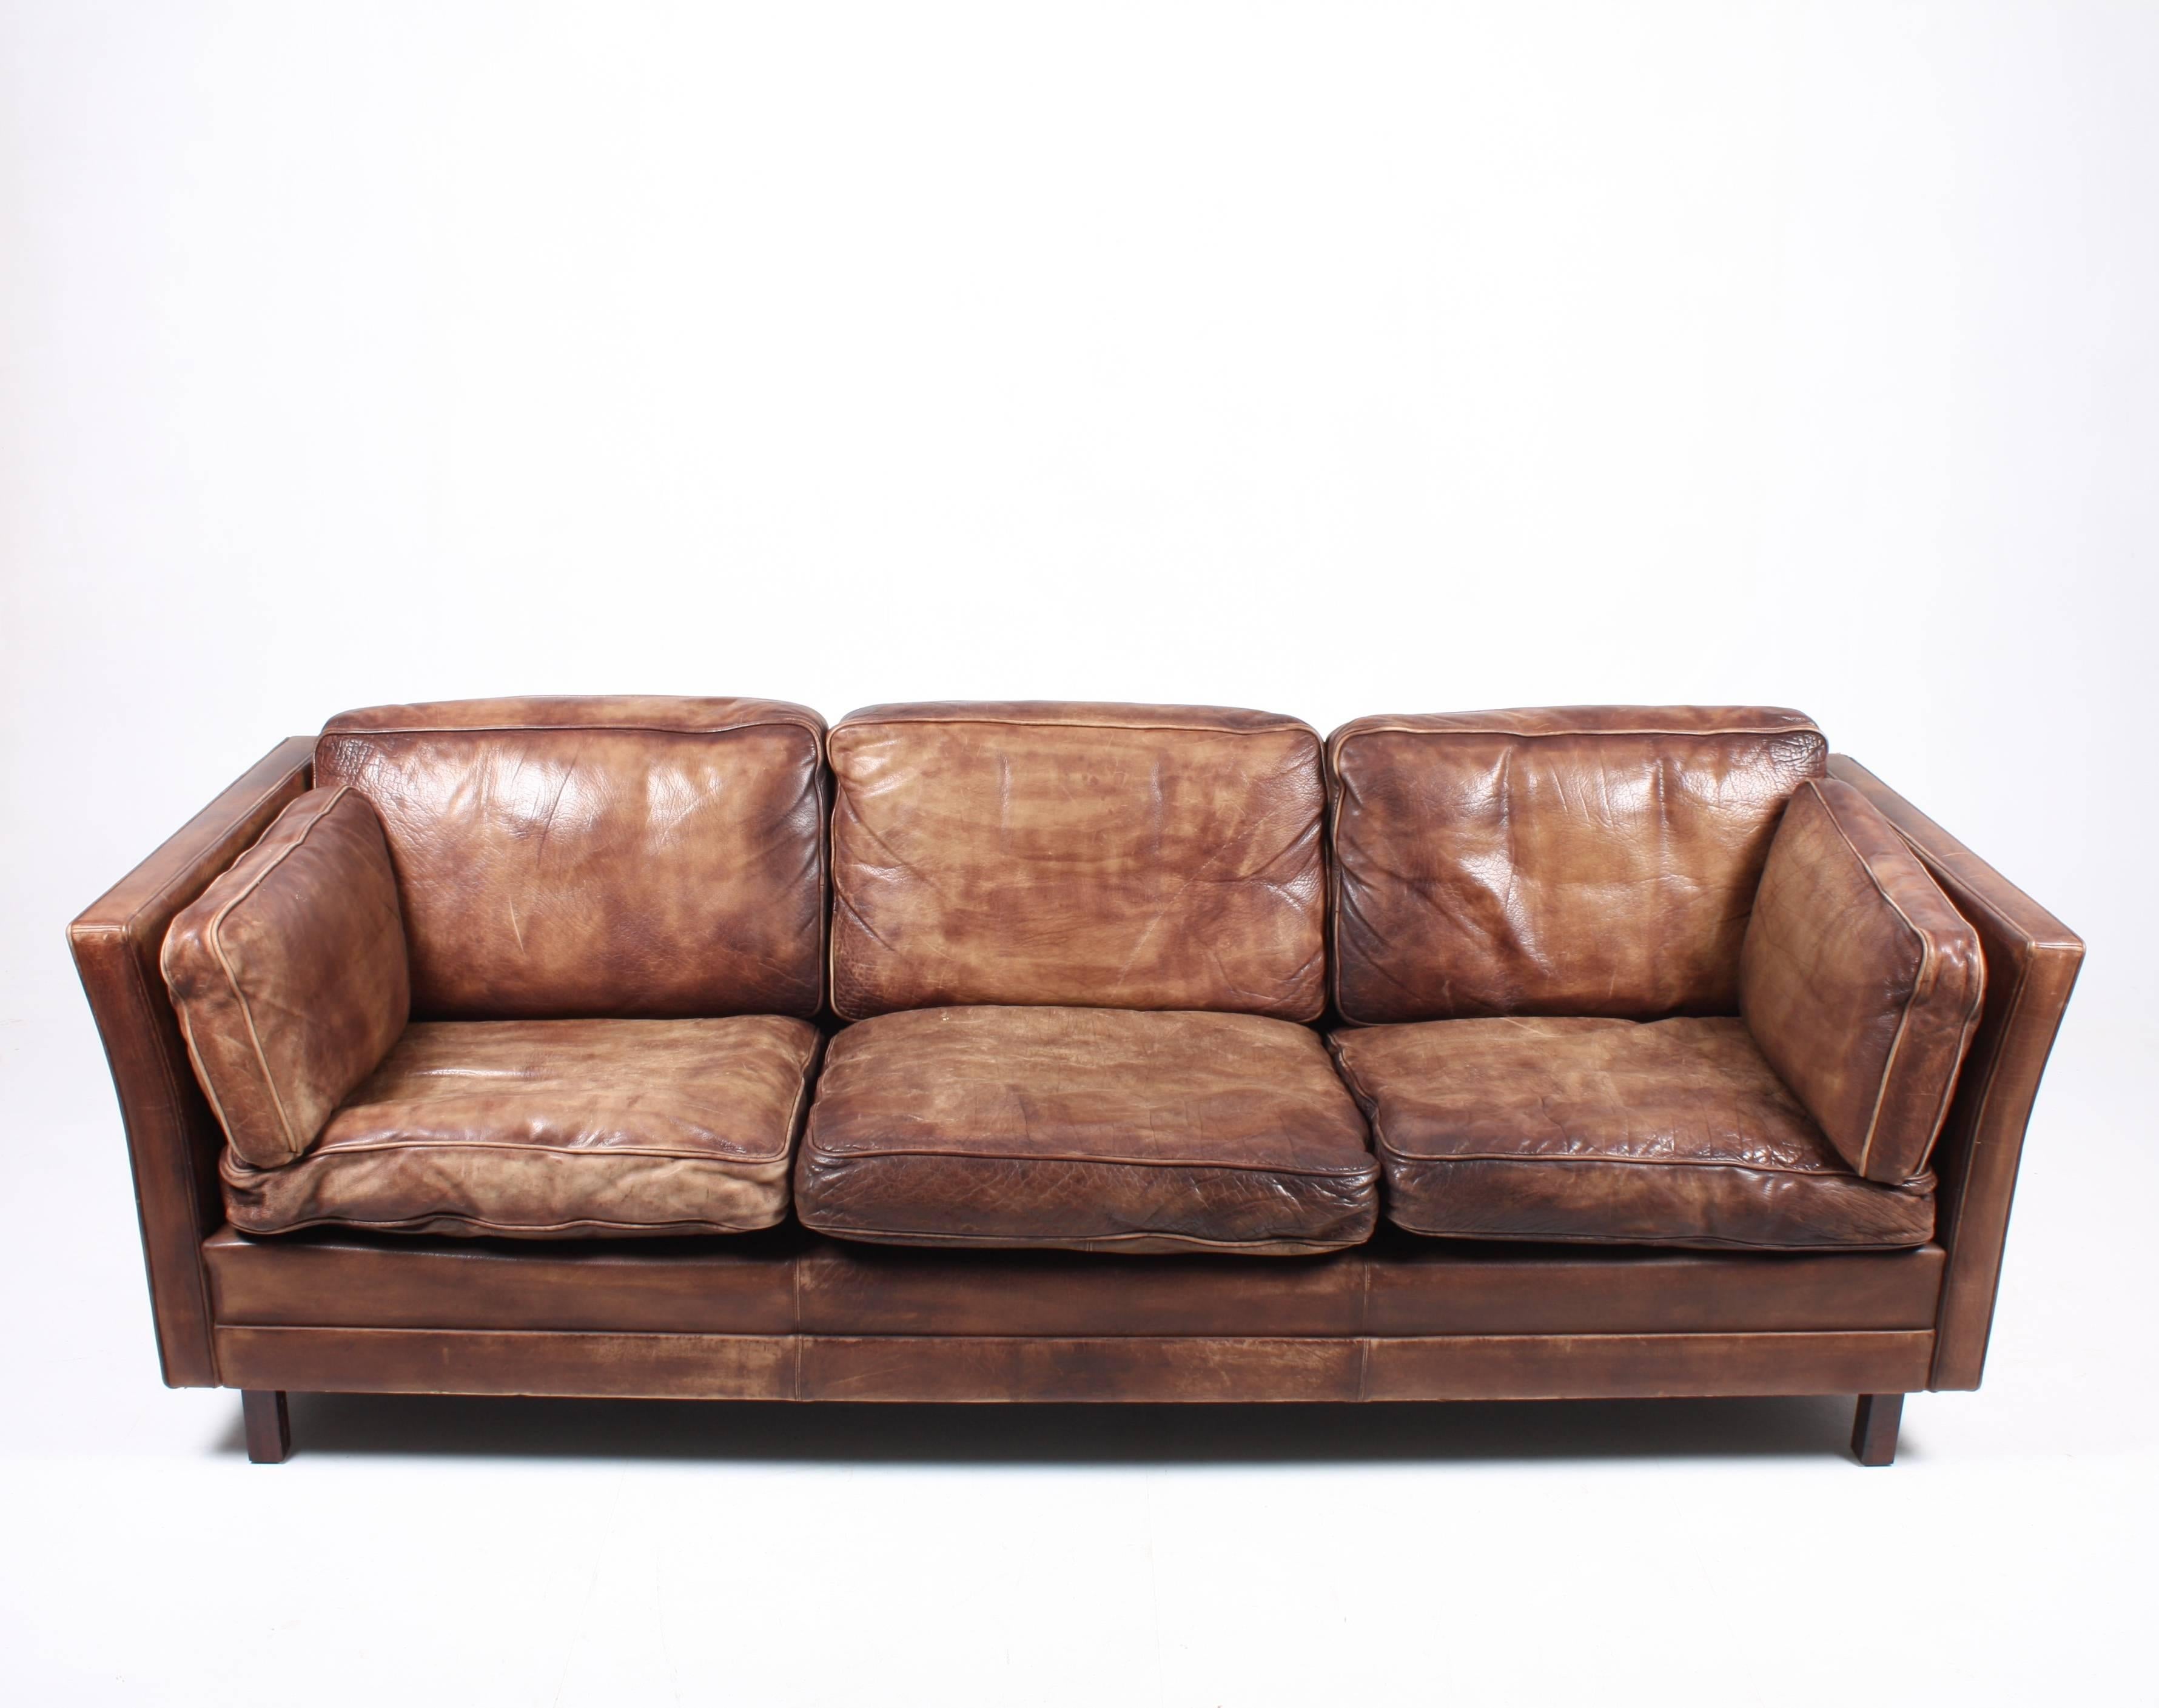 Mid-20th Century Danish Sofa in Patinated Leather